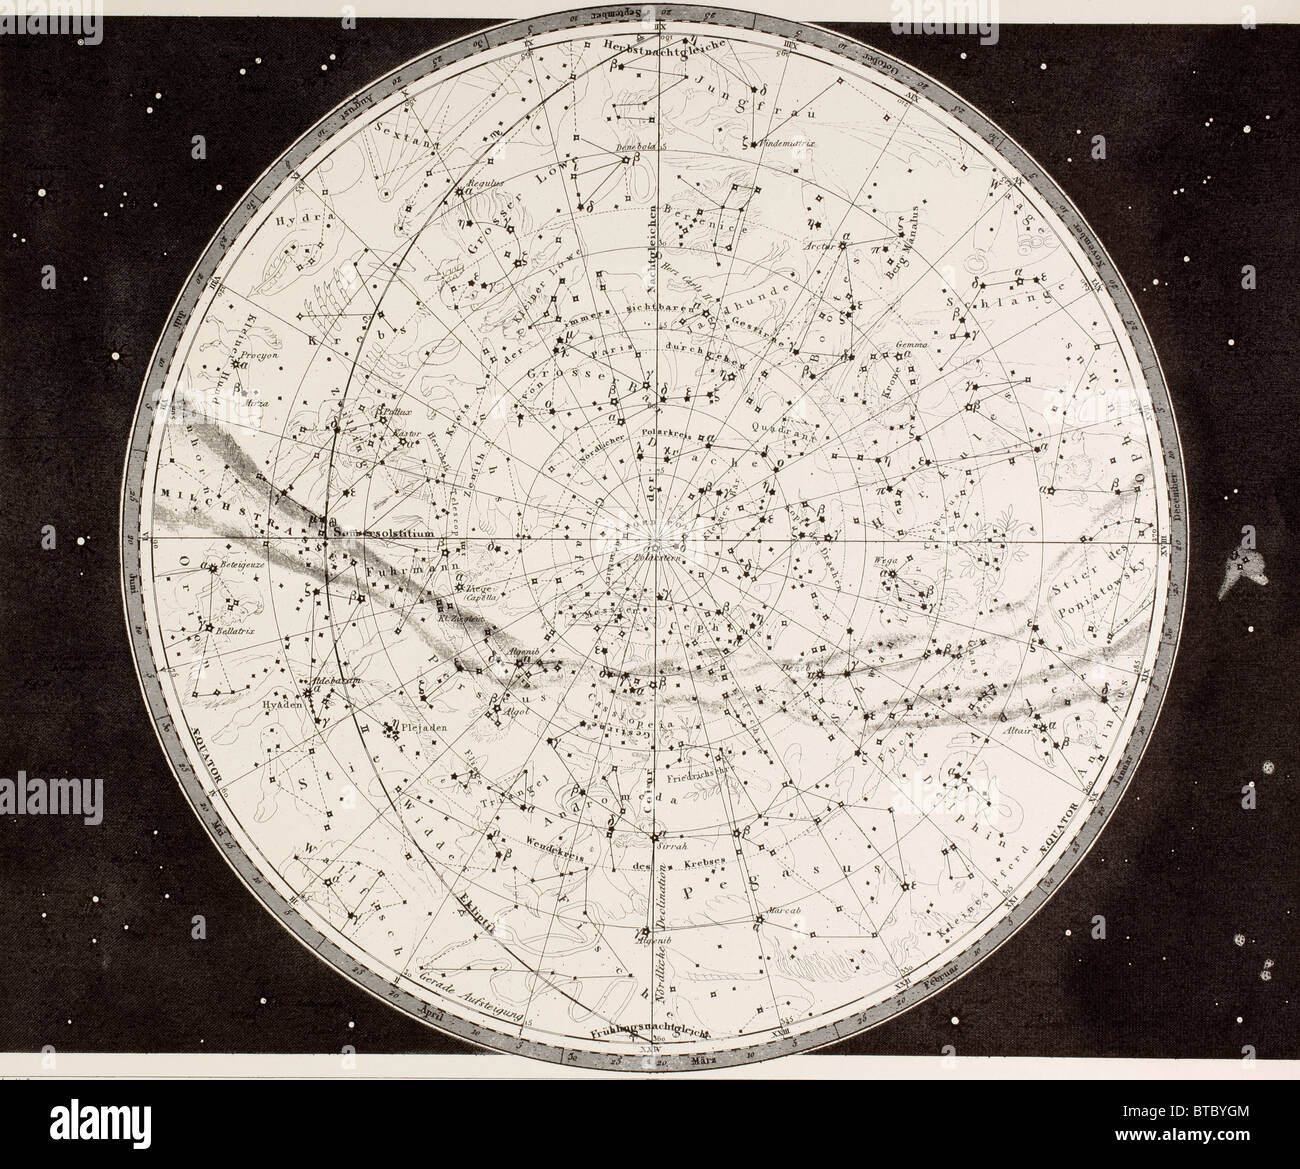 19th century map of the Northern Heavens. Stock Photo